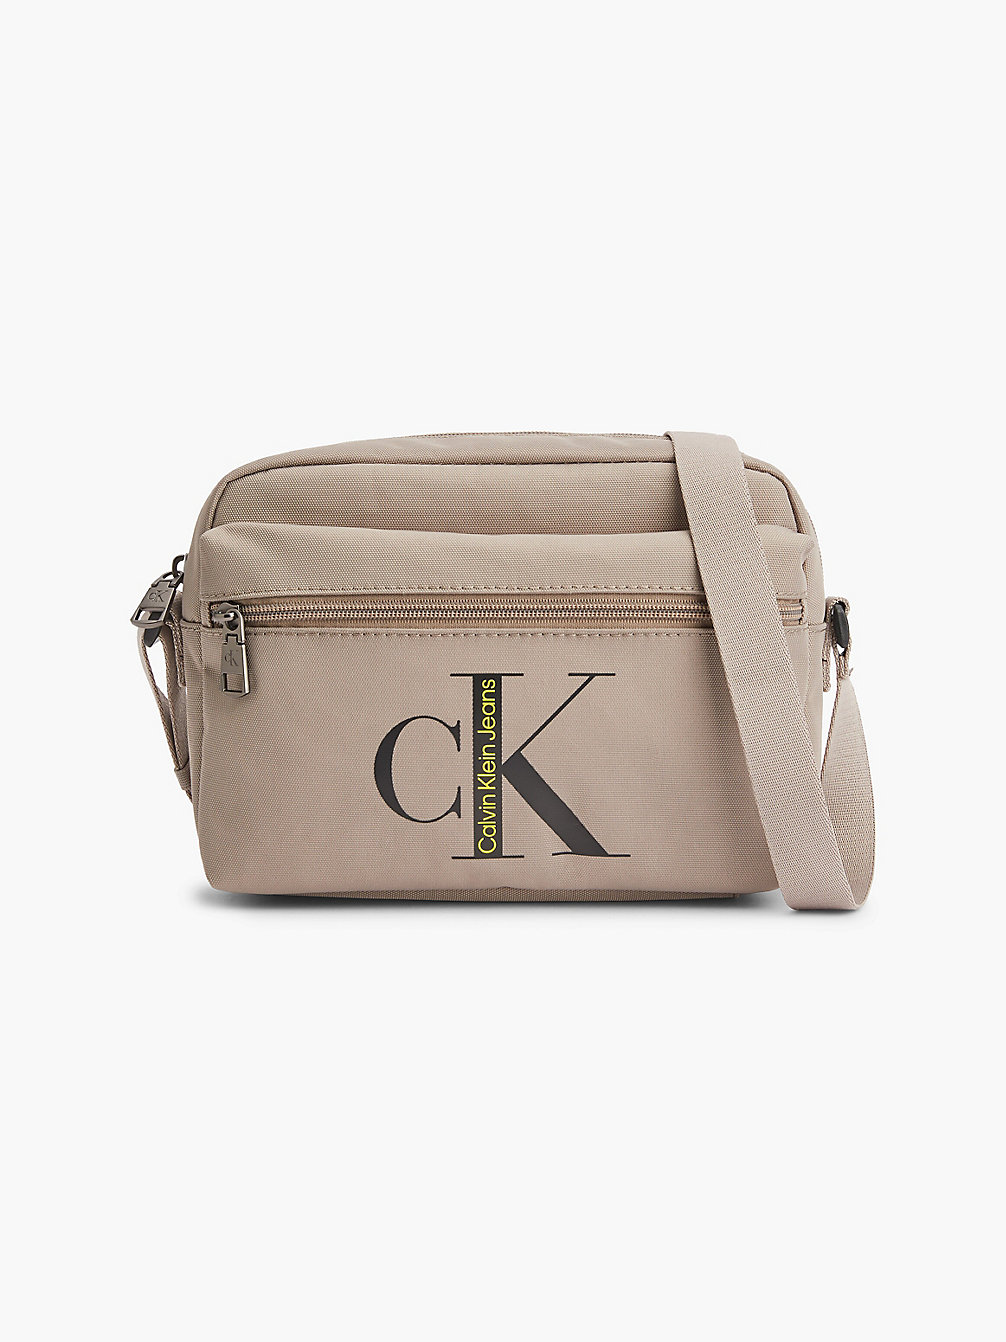 PERFECT TAUPE Recycled Crossbody Bag undefined men Calvin Klein